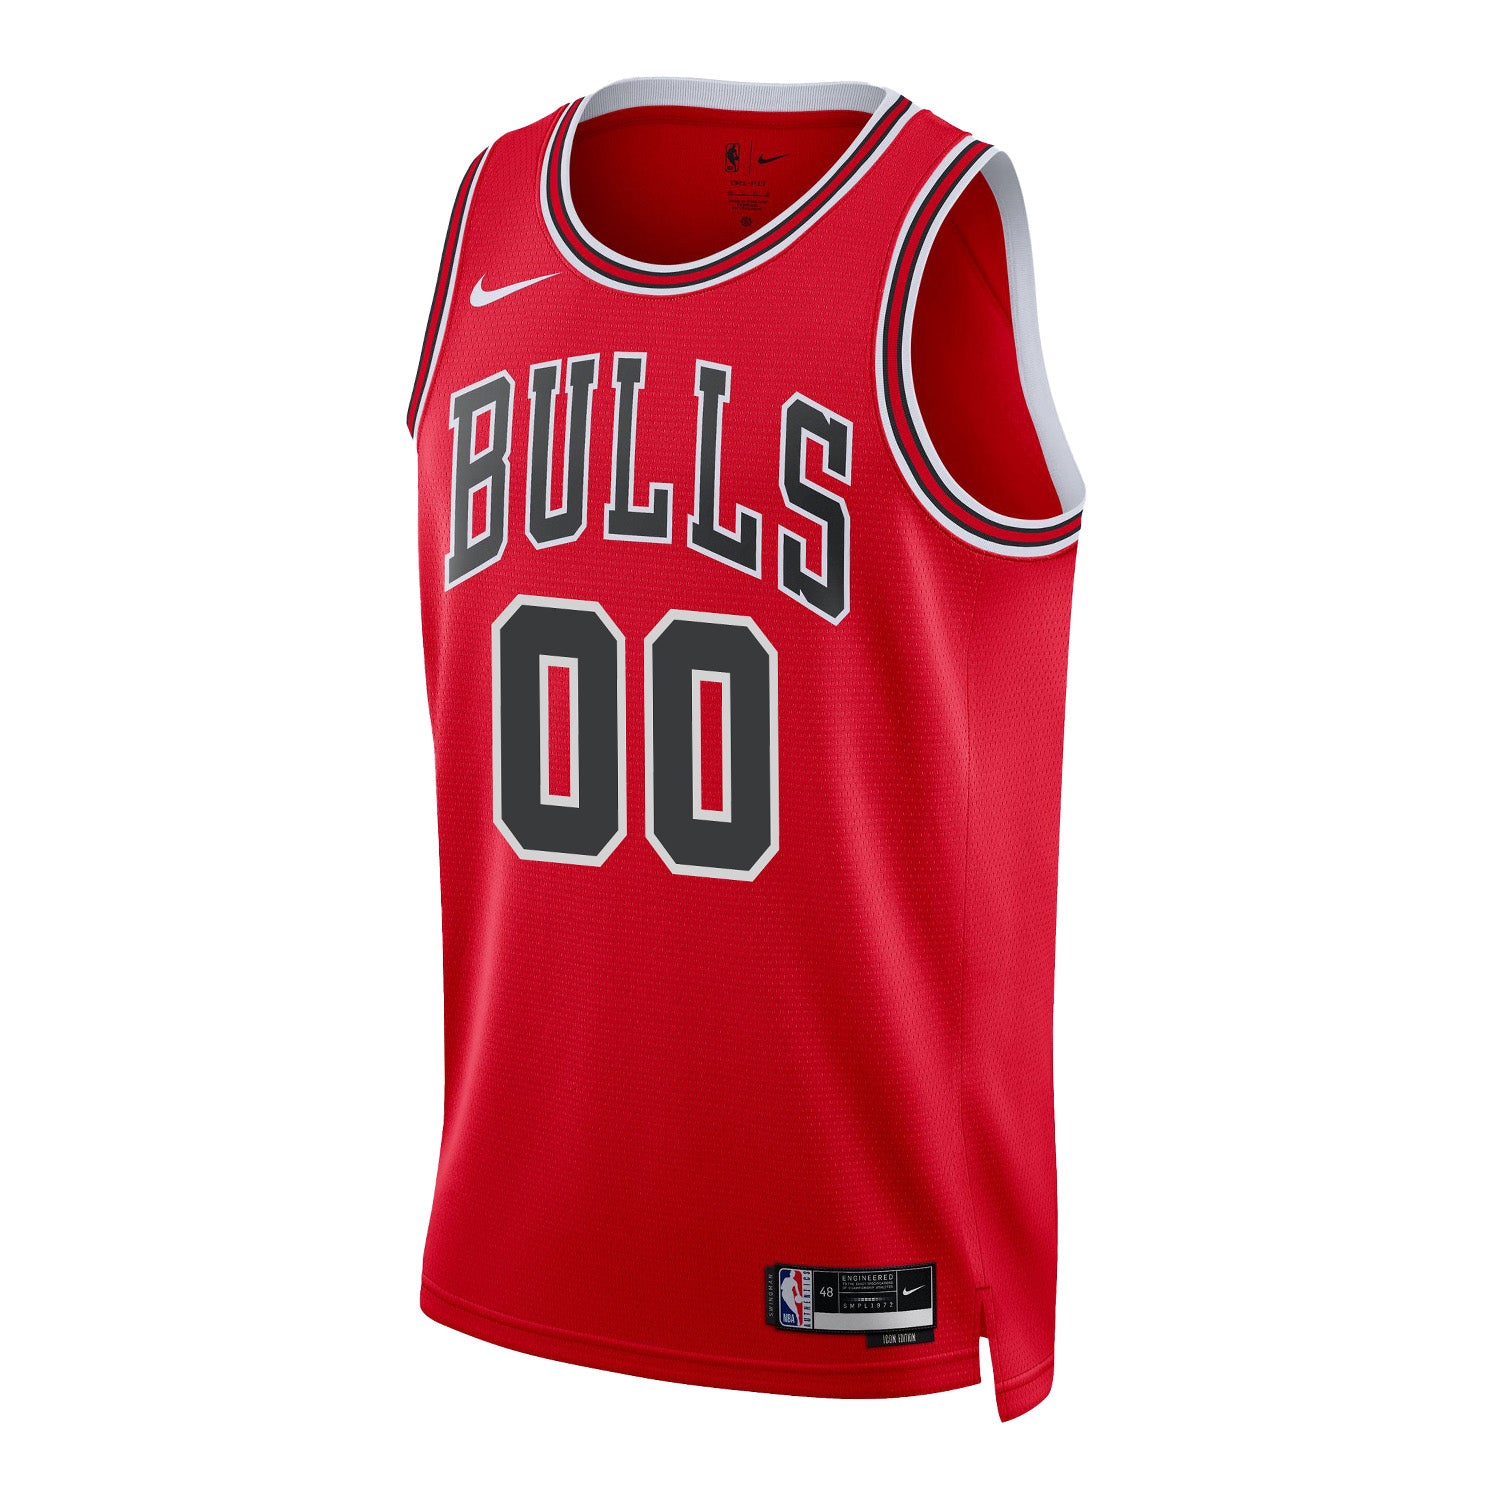 Youth Chicago Bulls Personalized Nike Icon Swingman Jersey in red - front  view